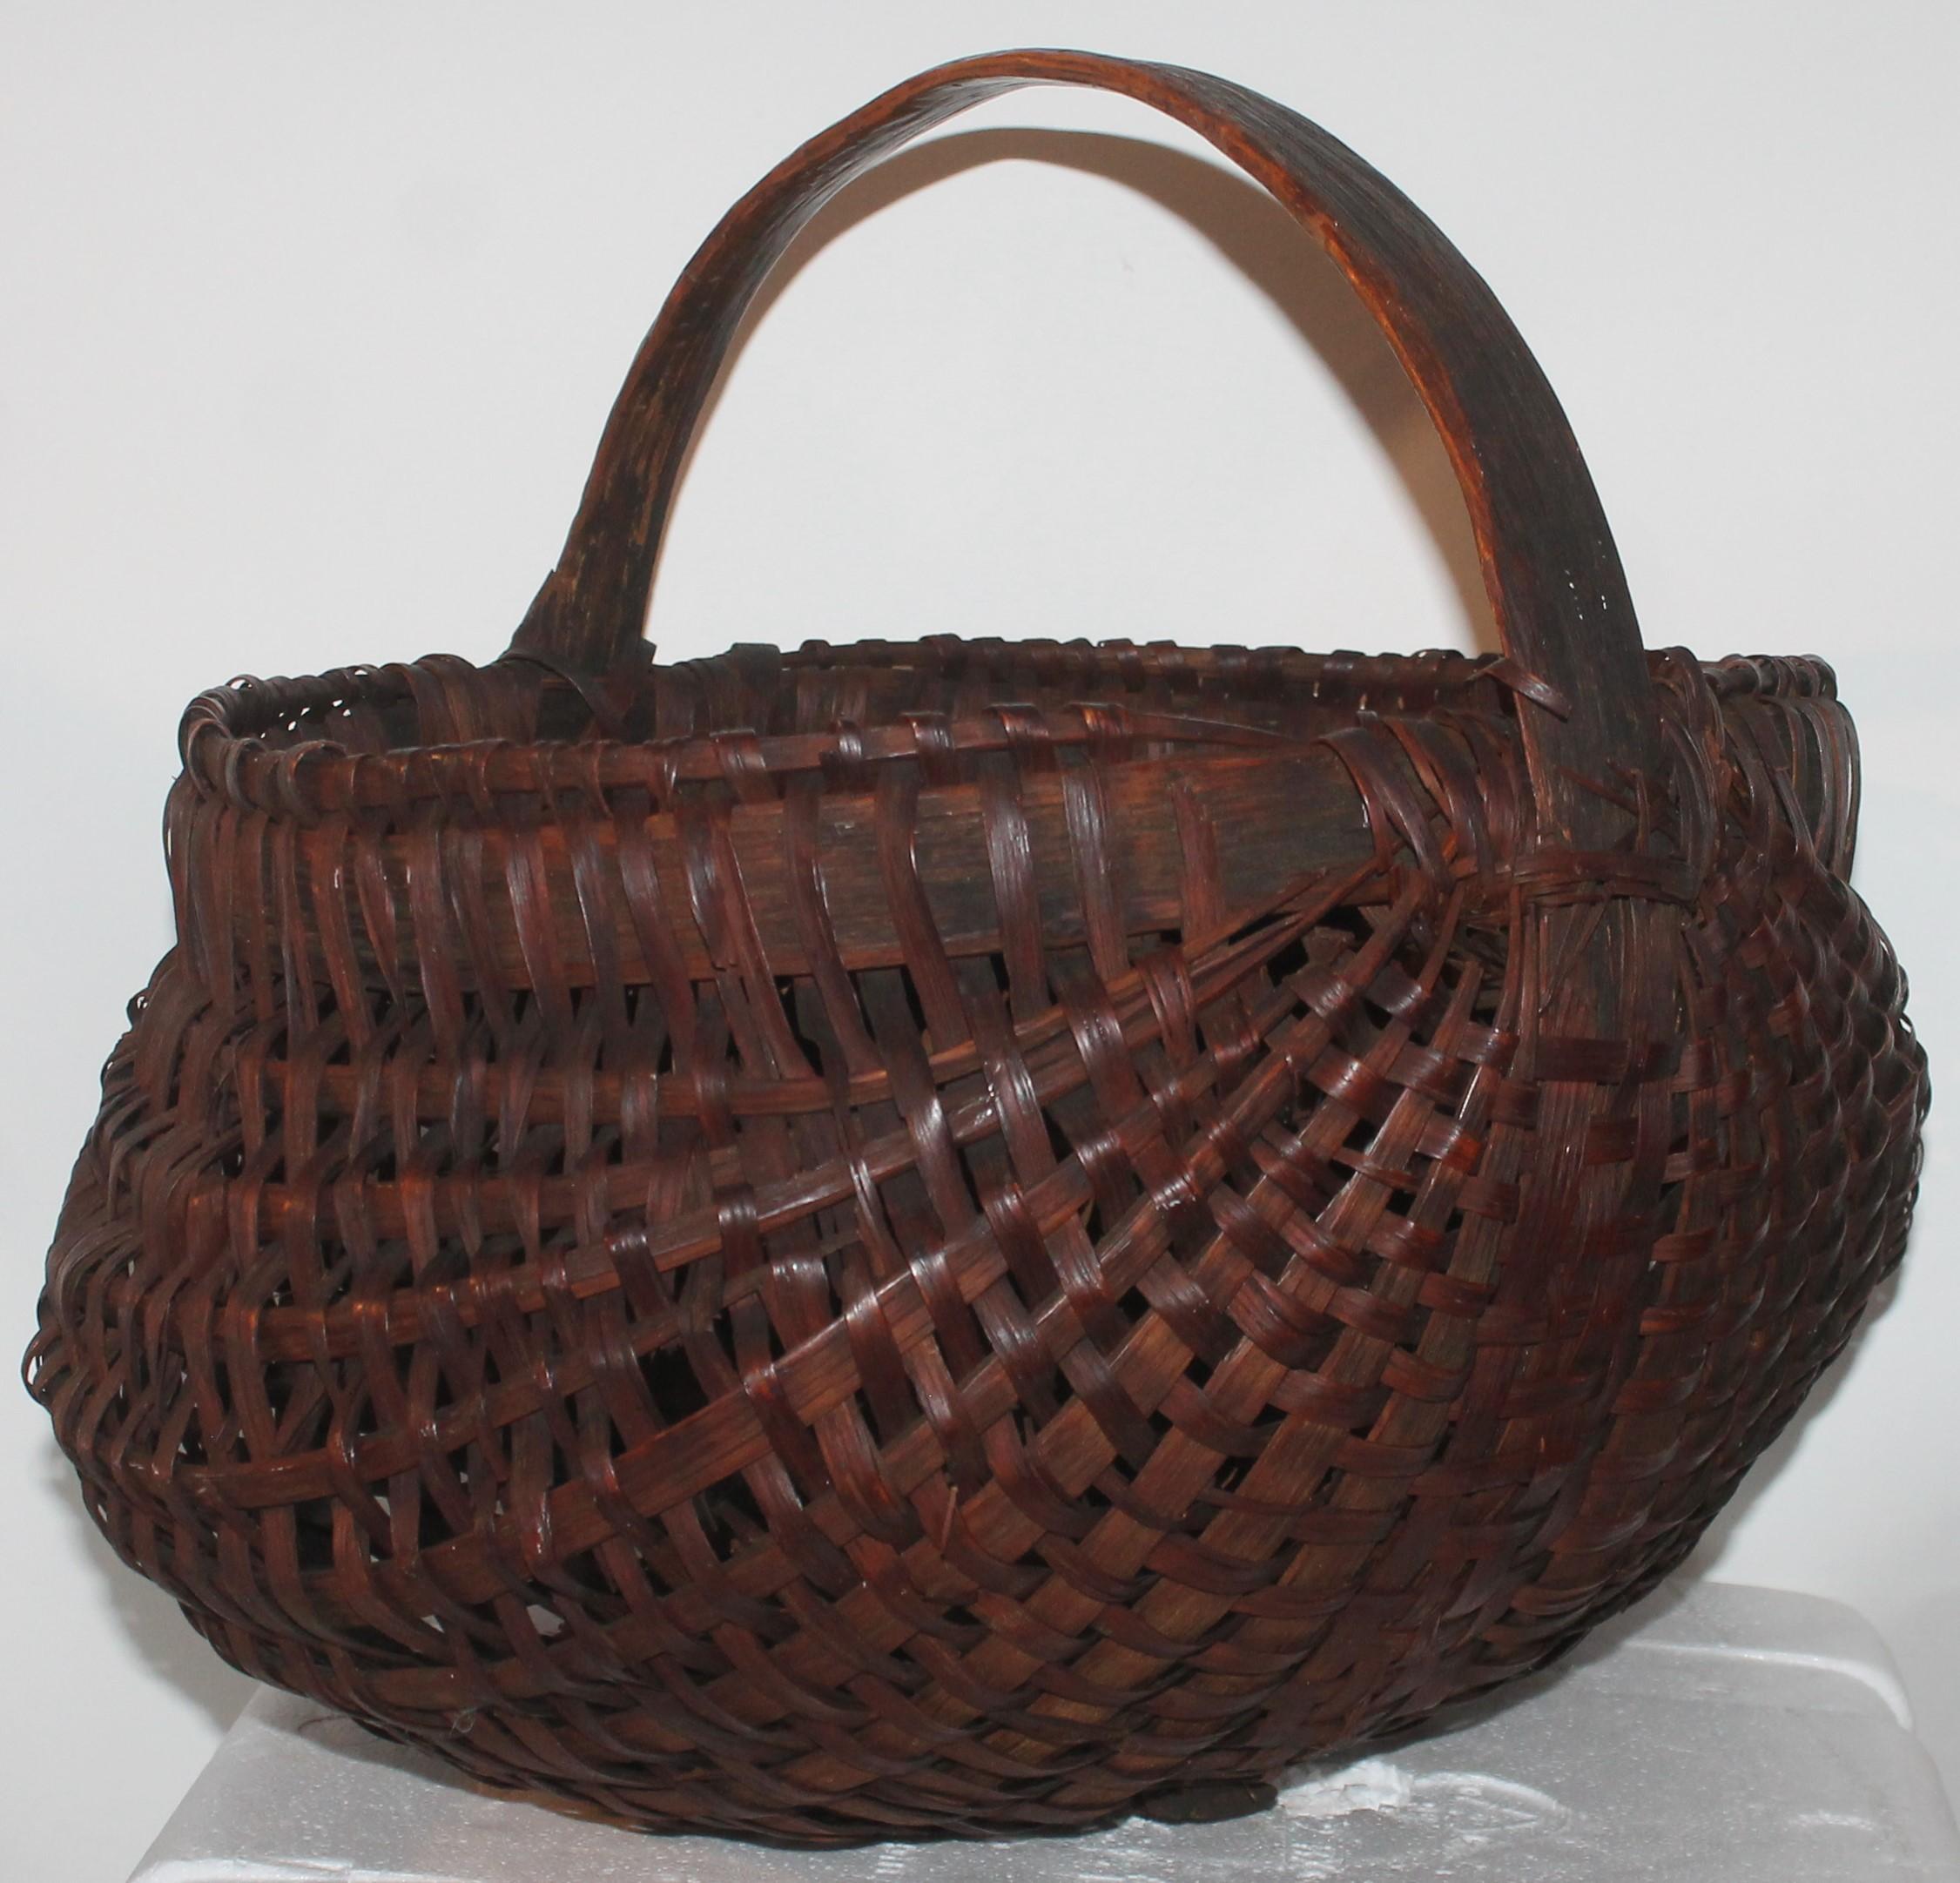 19th century handwoven hiney basket from Pennsylvania in good condition with several minor breaks.